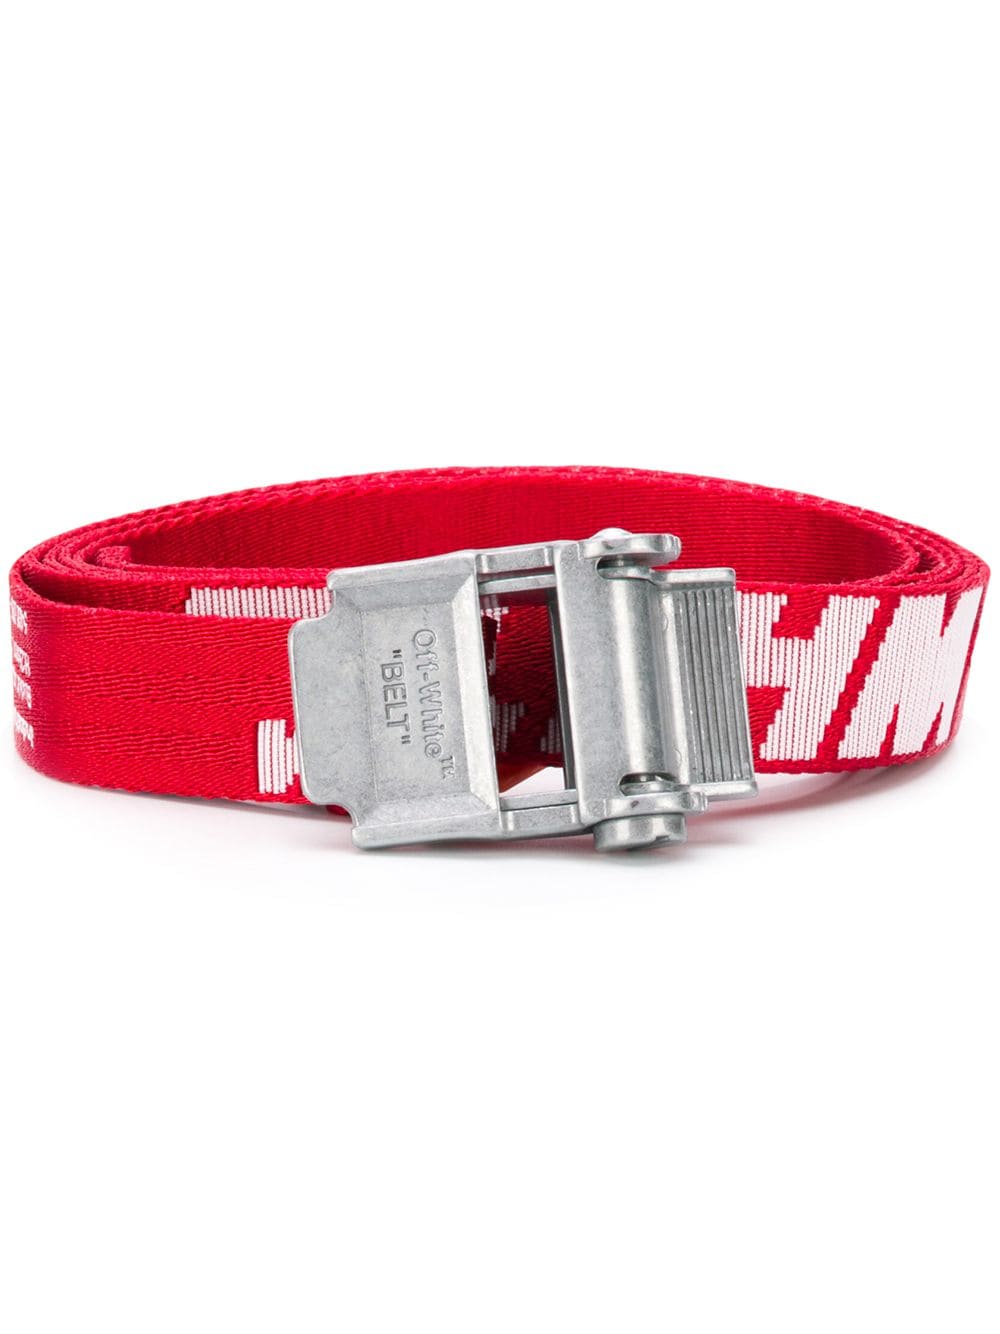 red and white off white belt